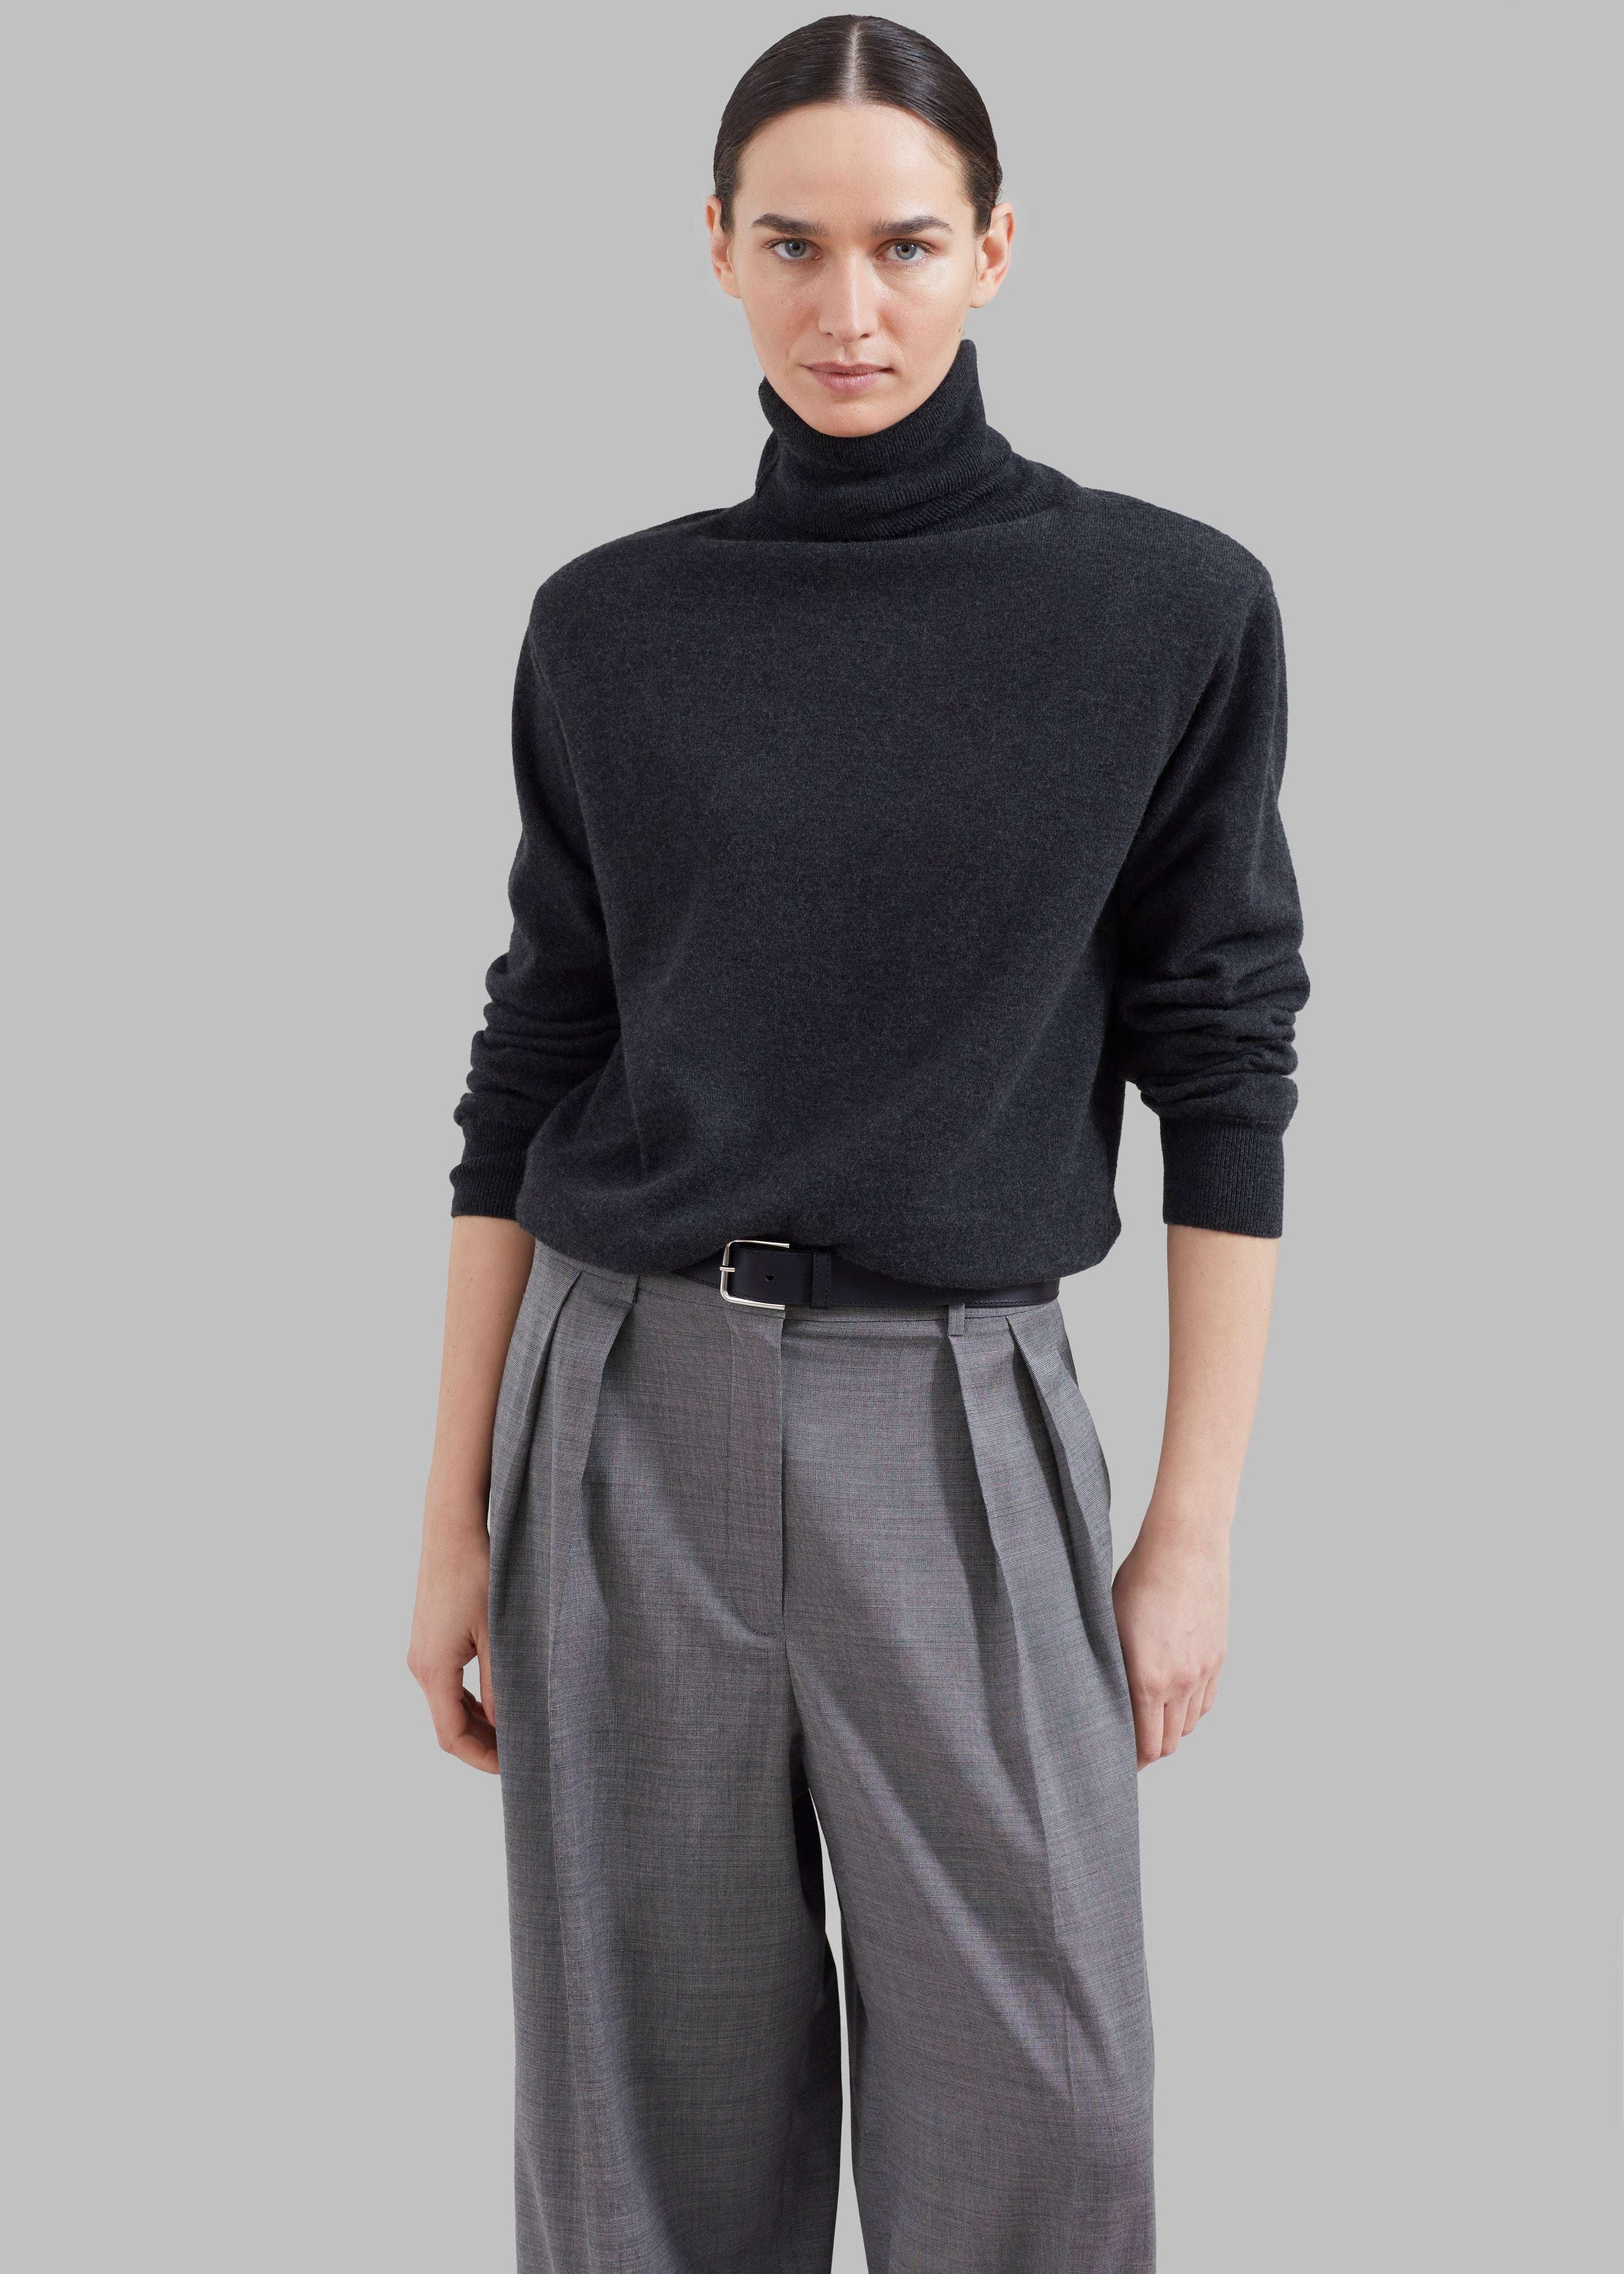 Ines Thin Padded Turtleneck - Charcoal - 6